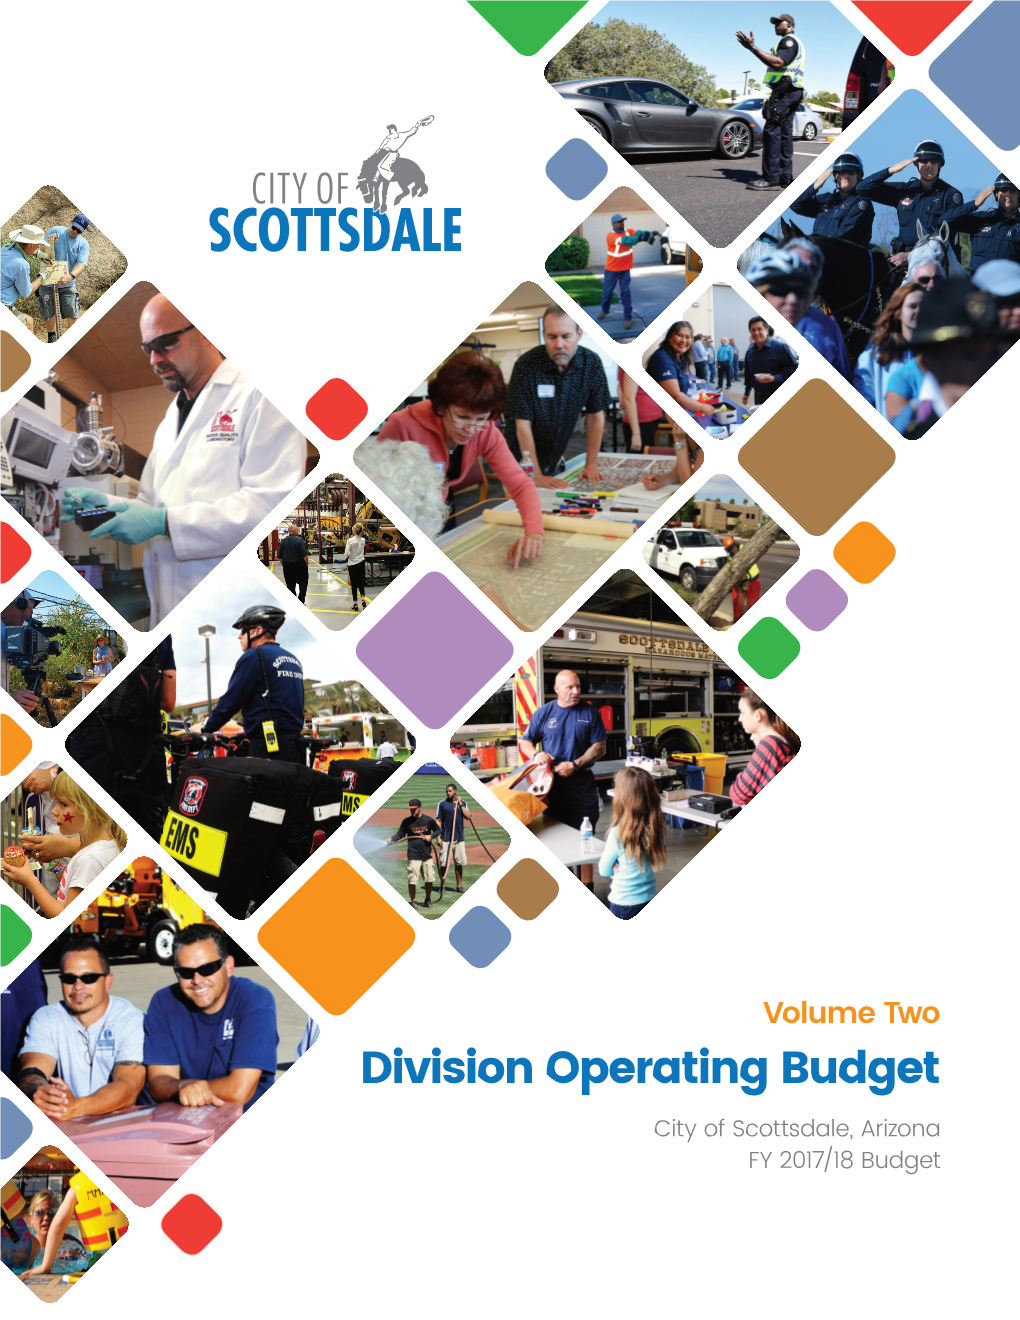 FY 2017-18 Volume 2 Division Operating Budget